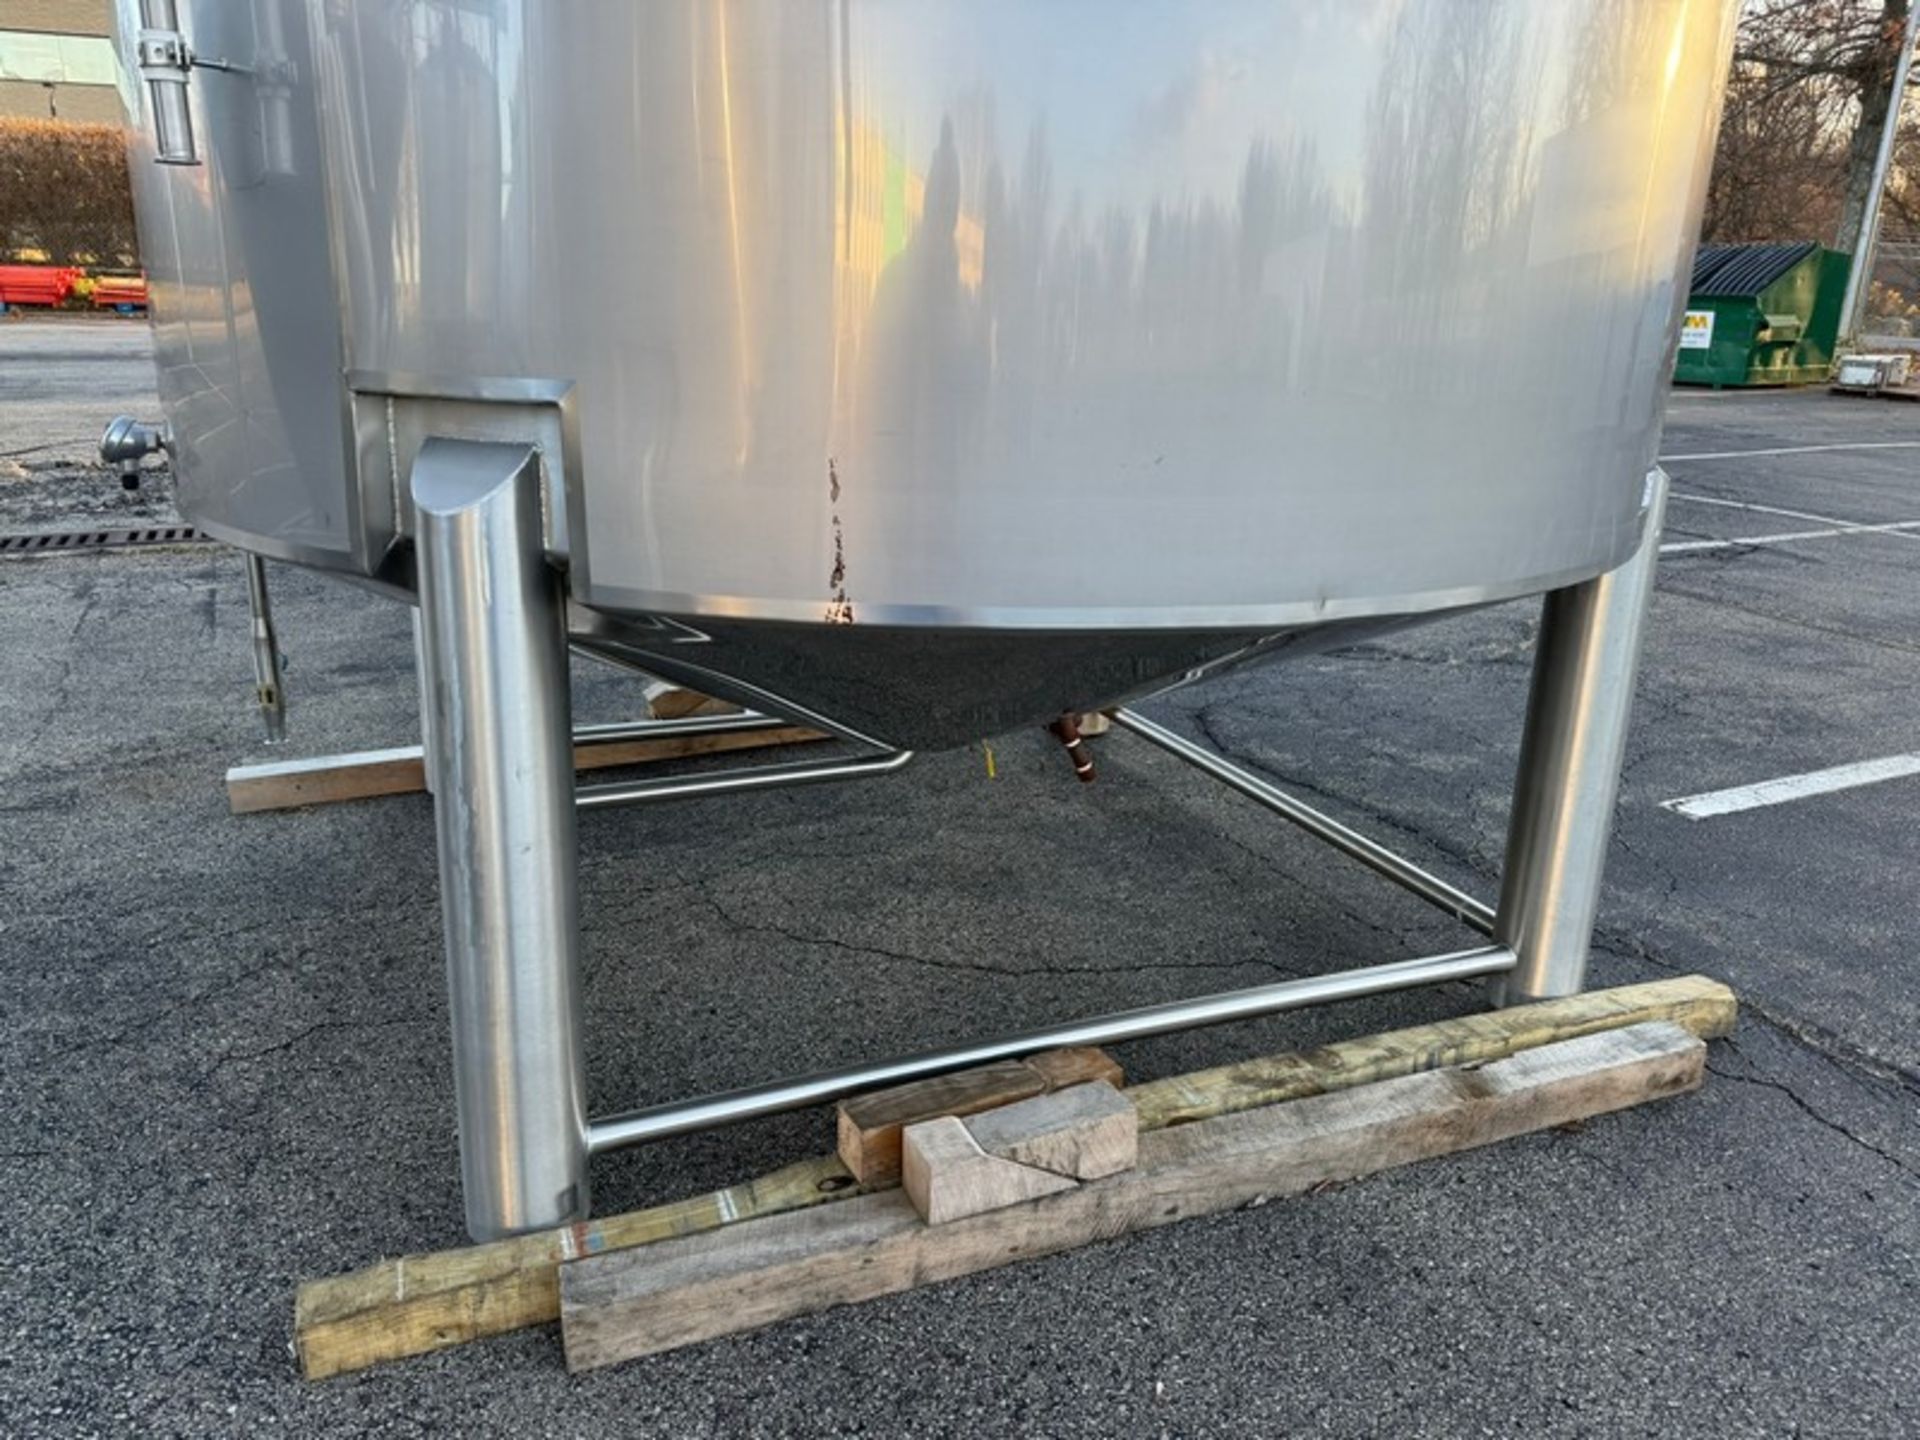 2012 Specific Mechanical Systems 200 BBL Capacity S/S Cold Liquor Tank, S/N RMP-136-12-300, with S/S - Image 7 of 10